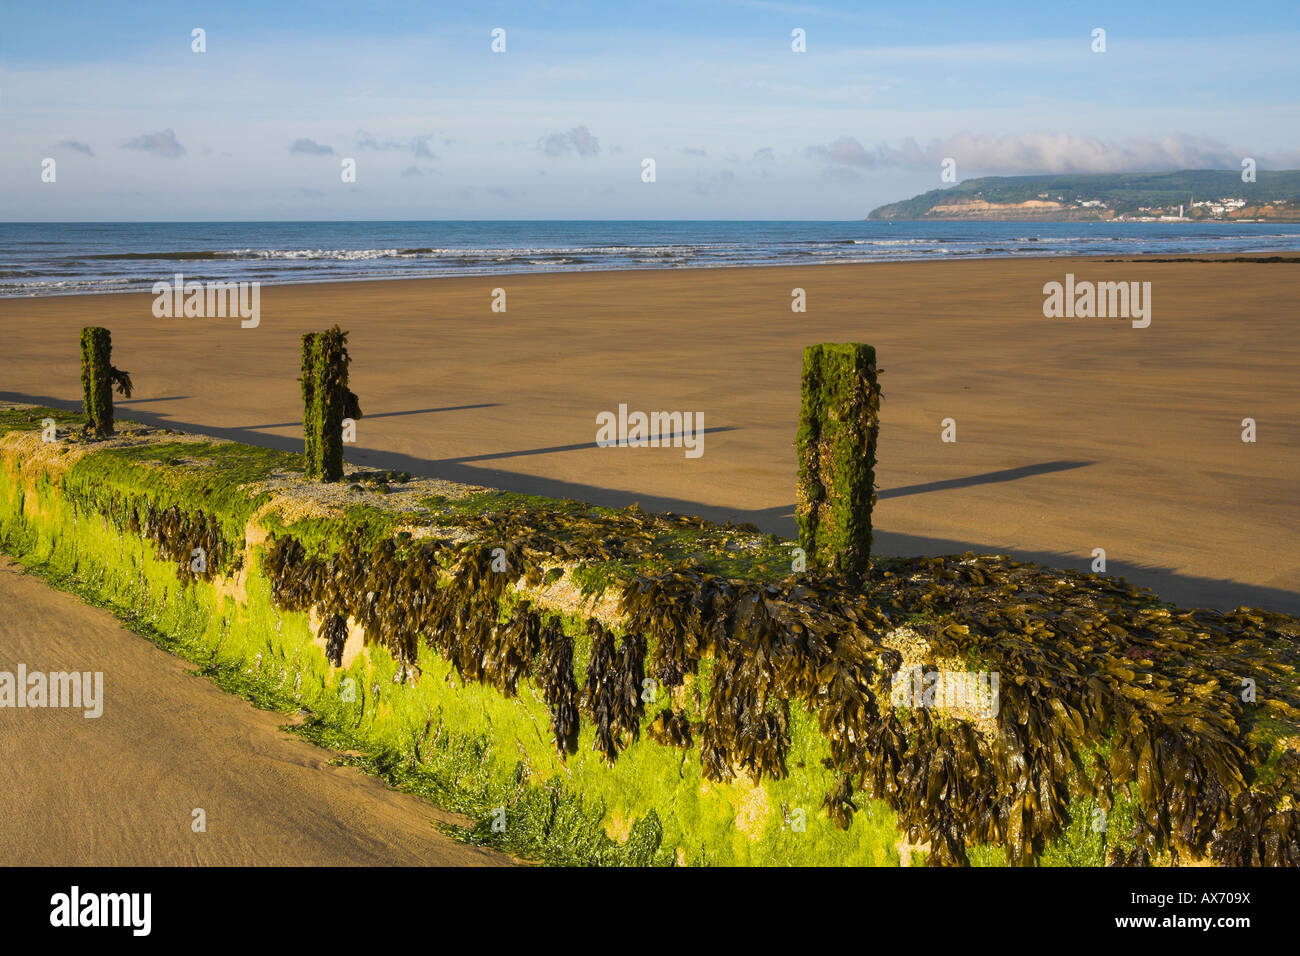 Golden sandy beach at Sandown on the south coast of the Isle of Wight Stock Photo